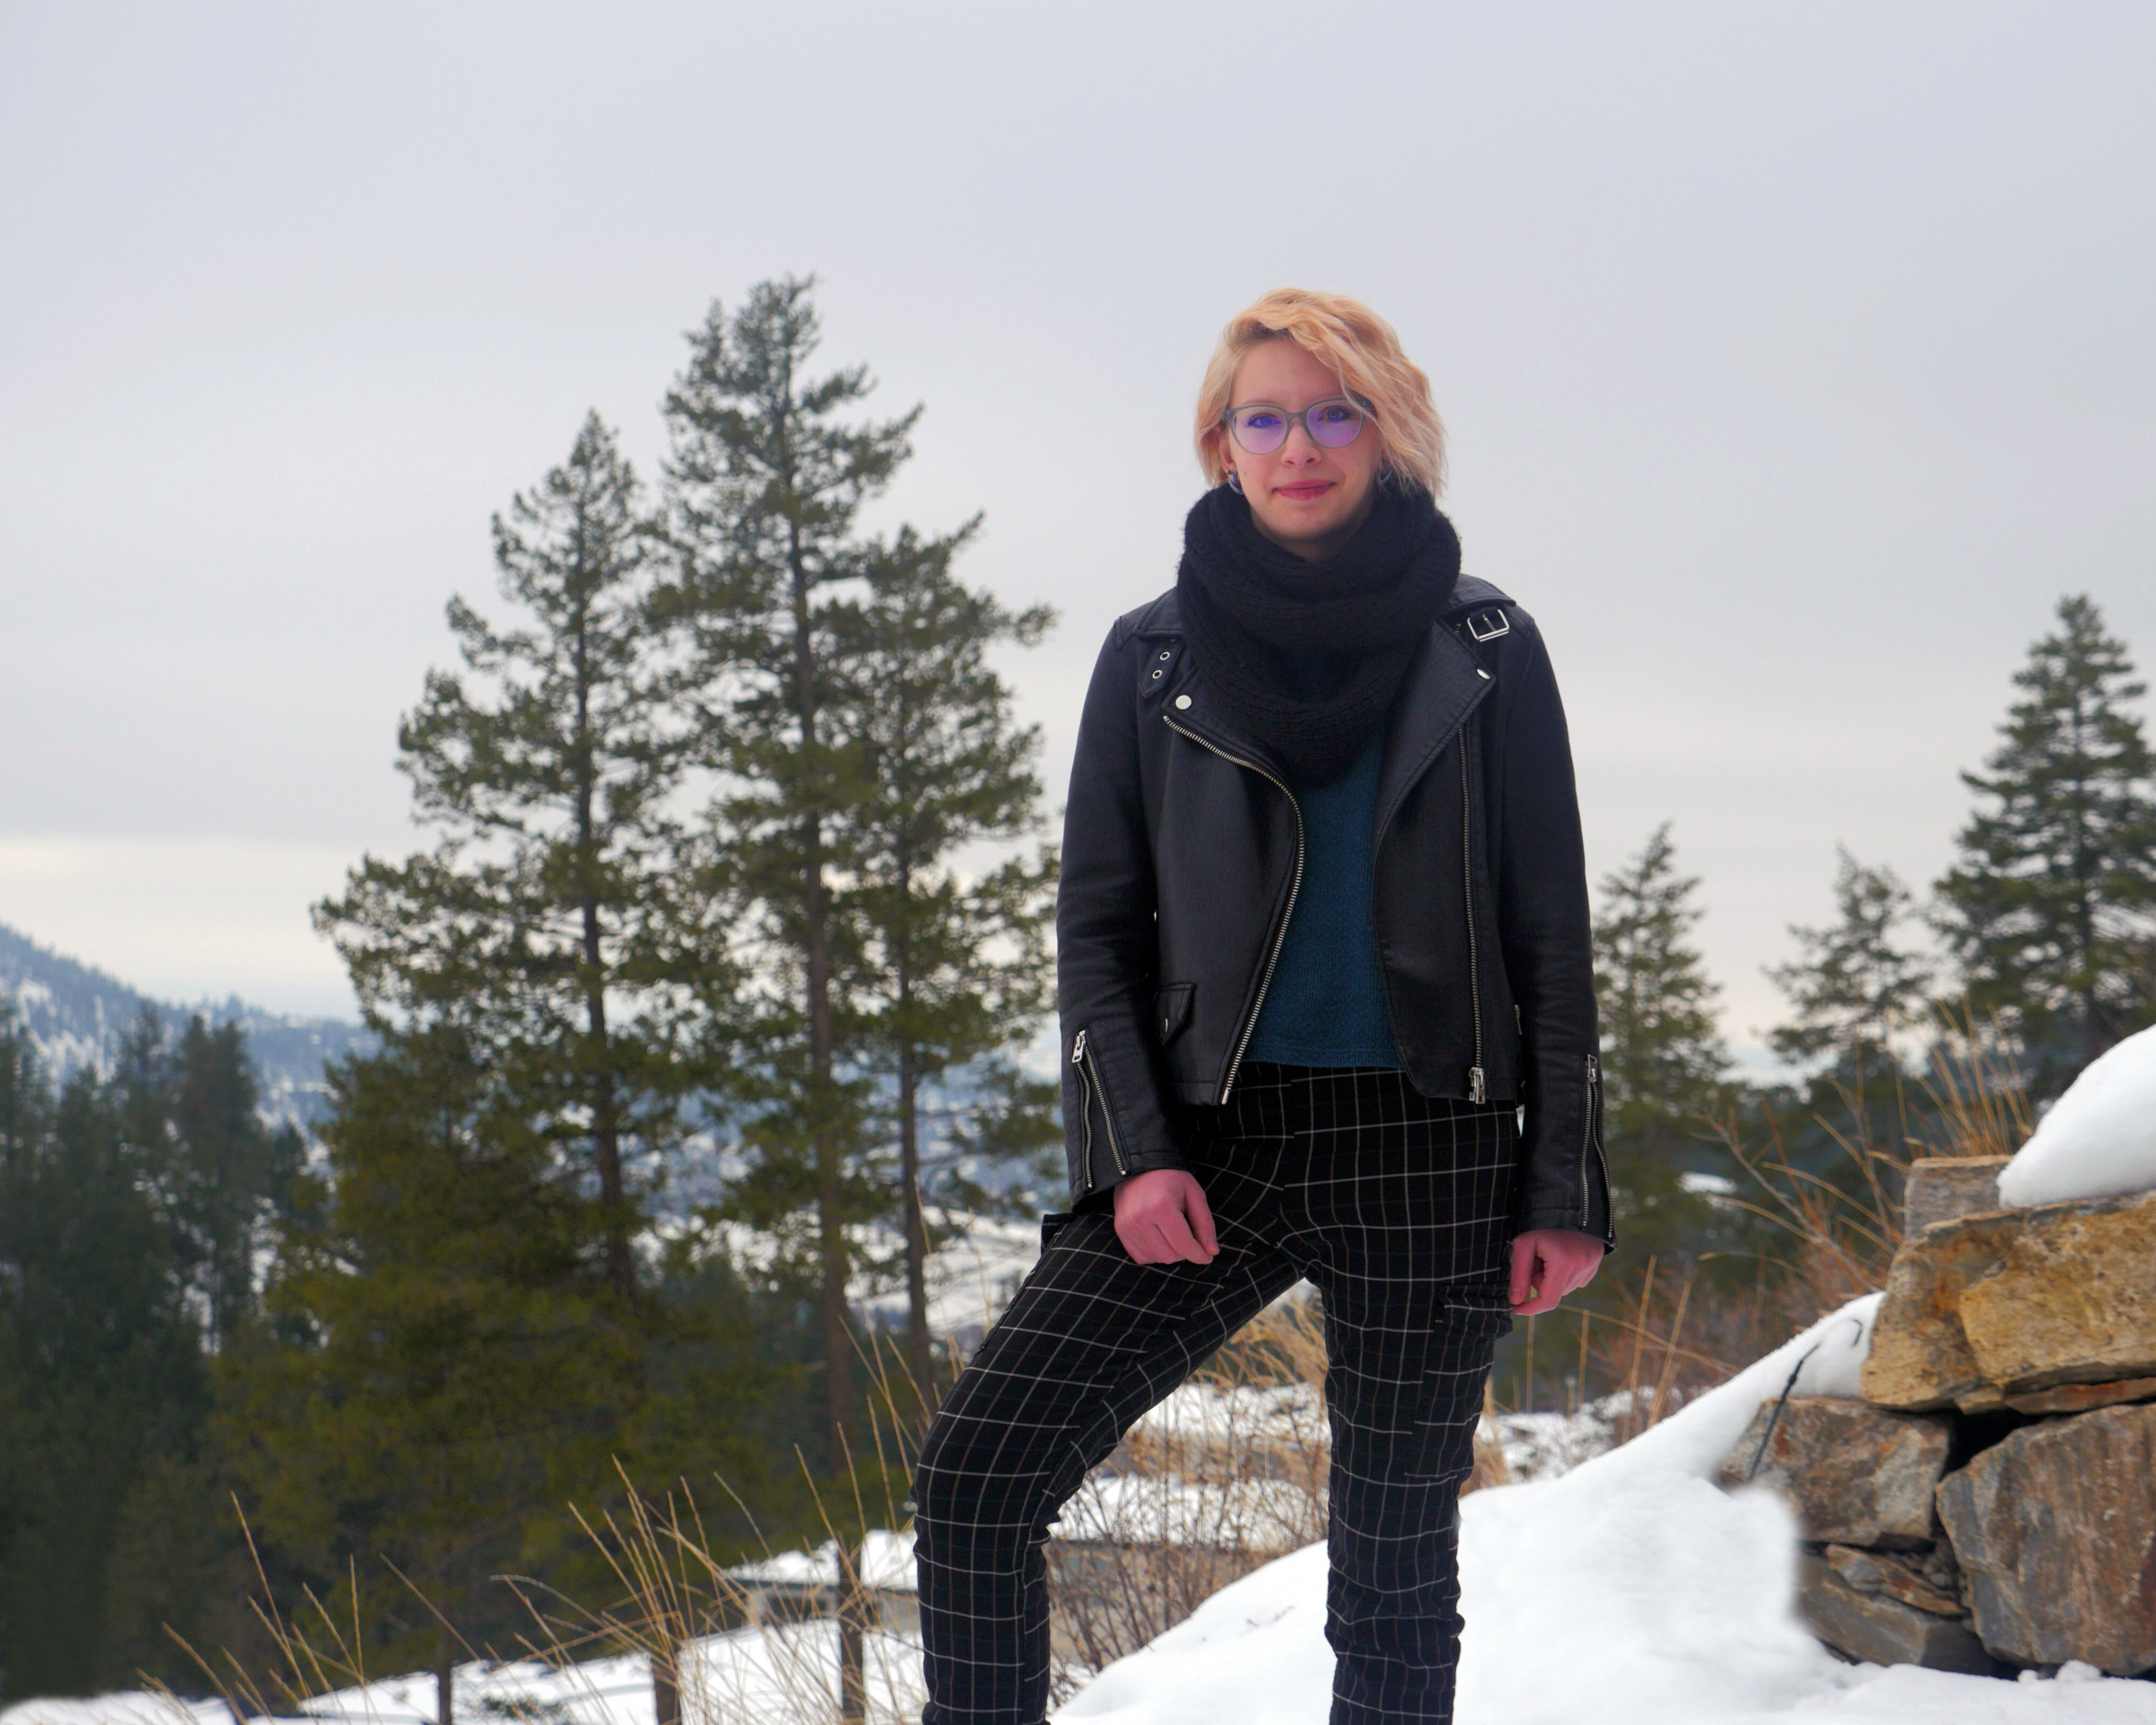 The author, Enya Duffield, outside smiling at the camera with trees and mountains in the background.